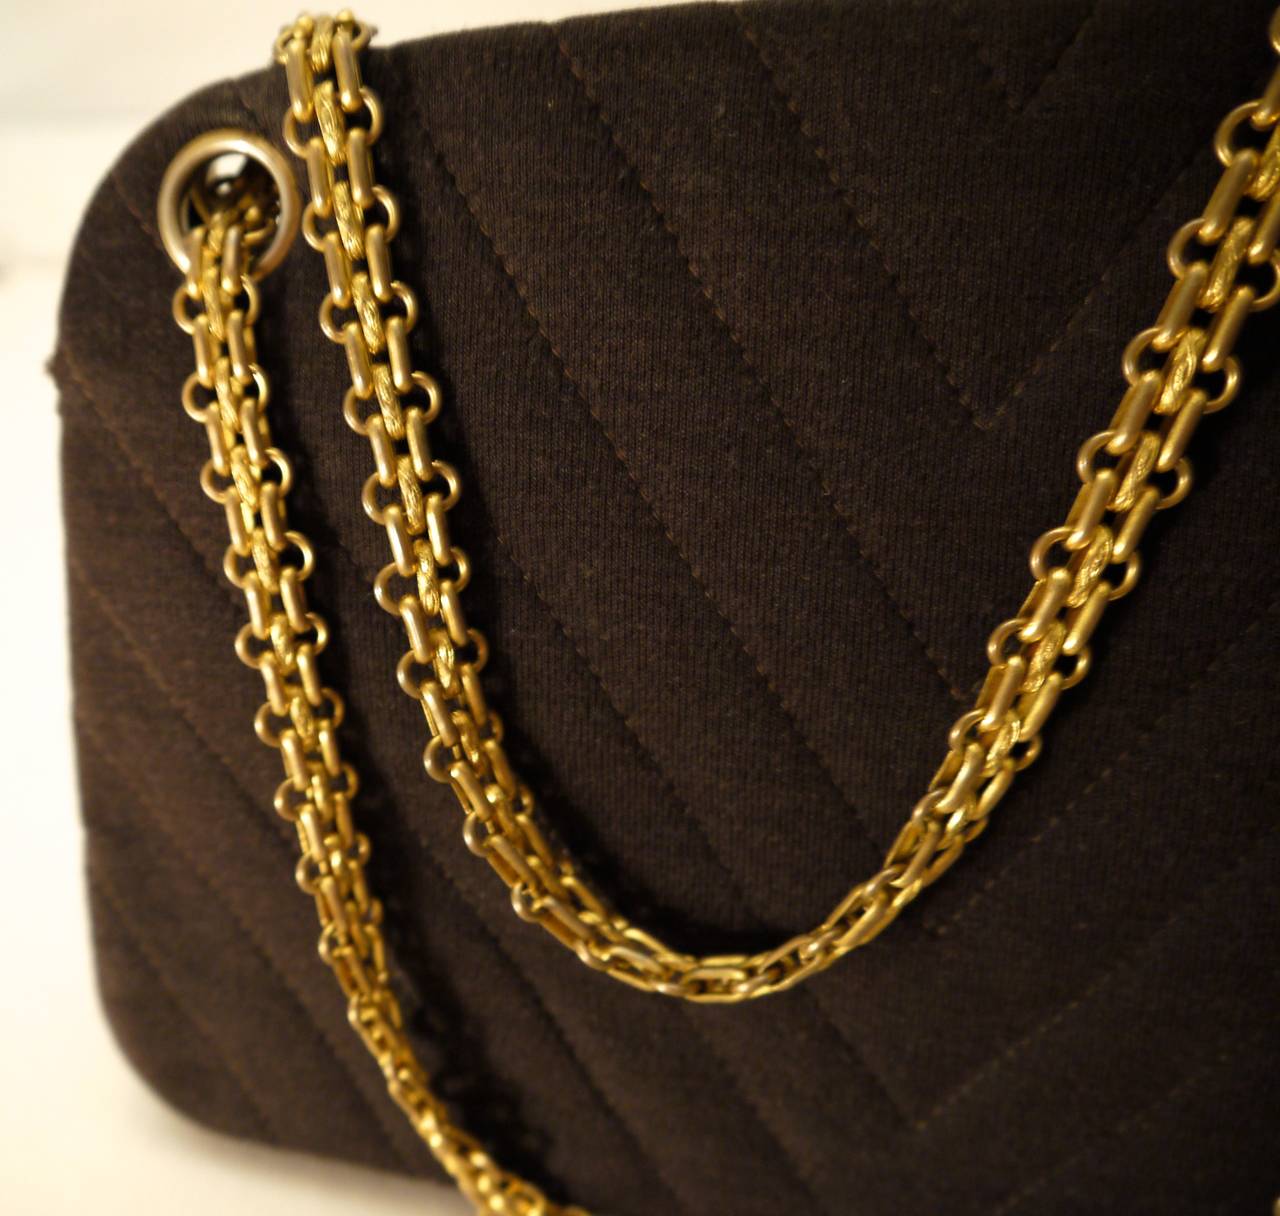 Women's Vintage Chanel Bag - 1950's - Rare Very Early Example of 2.55 Chain